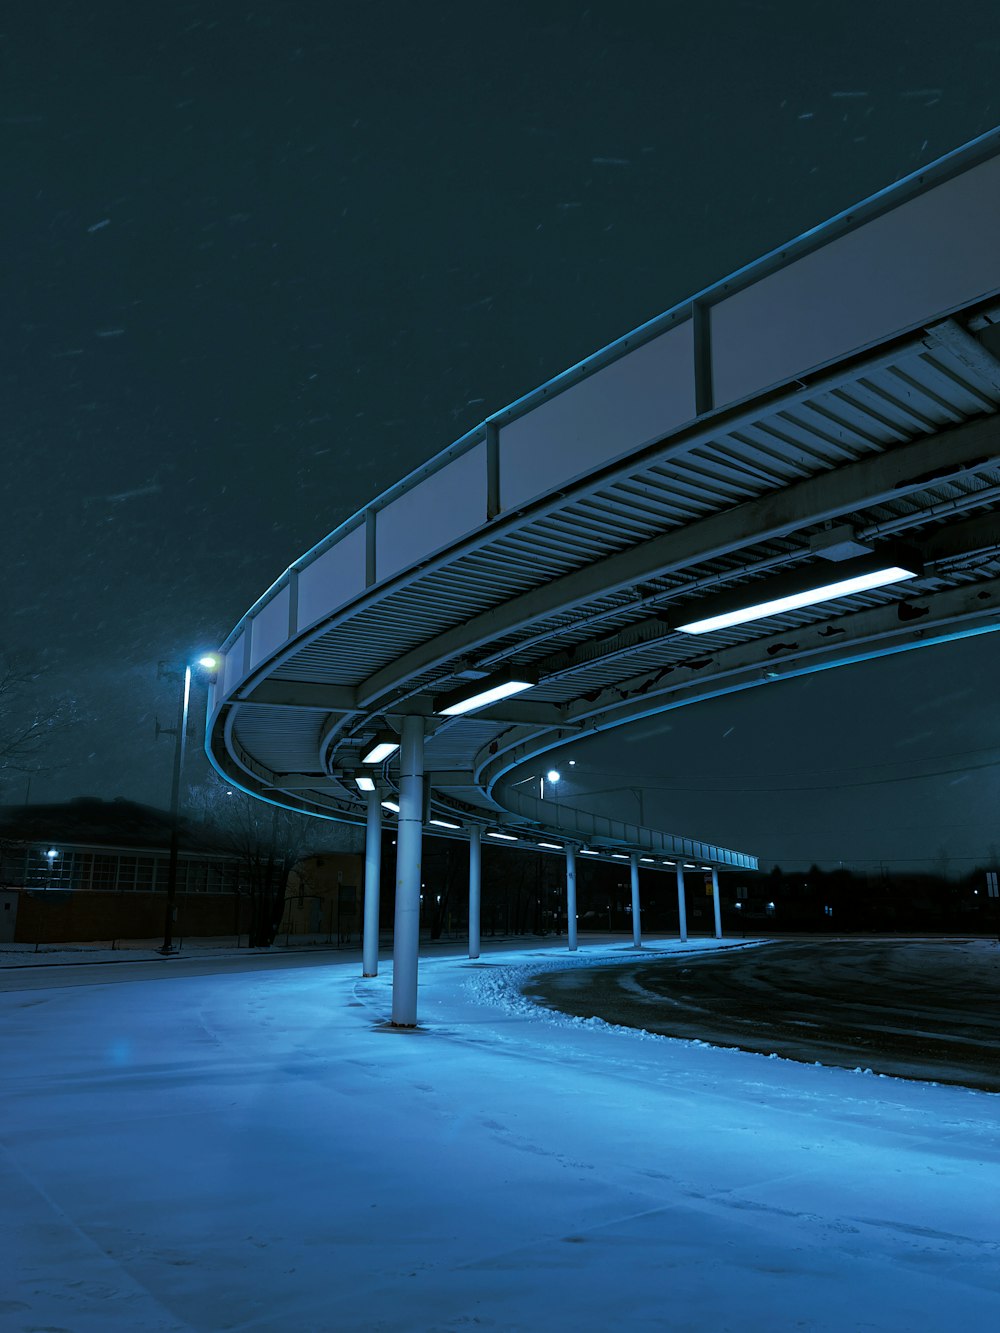 a night time picture of a snow covered parking lot